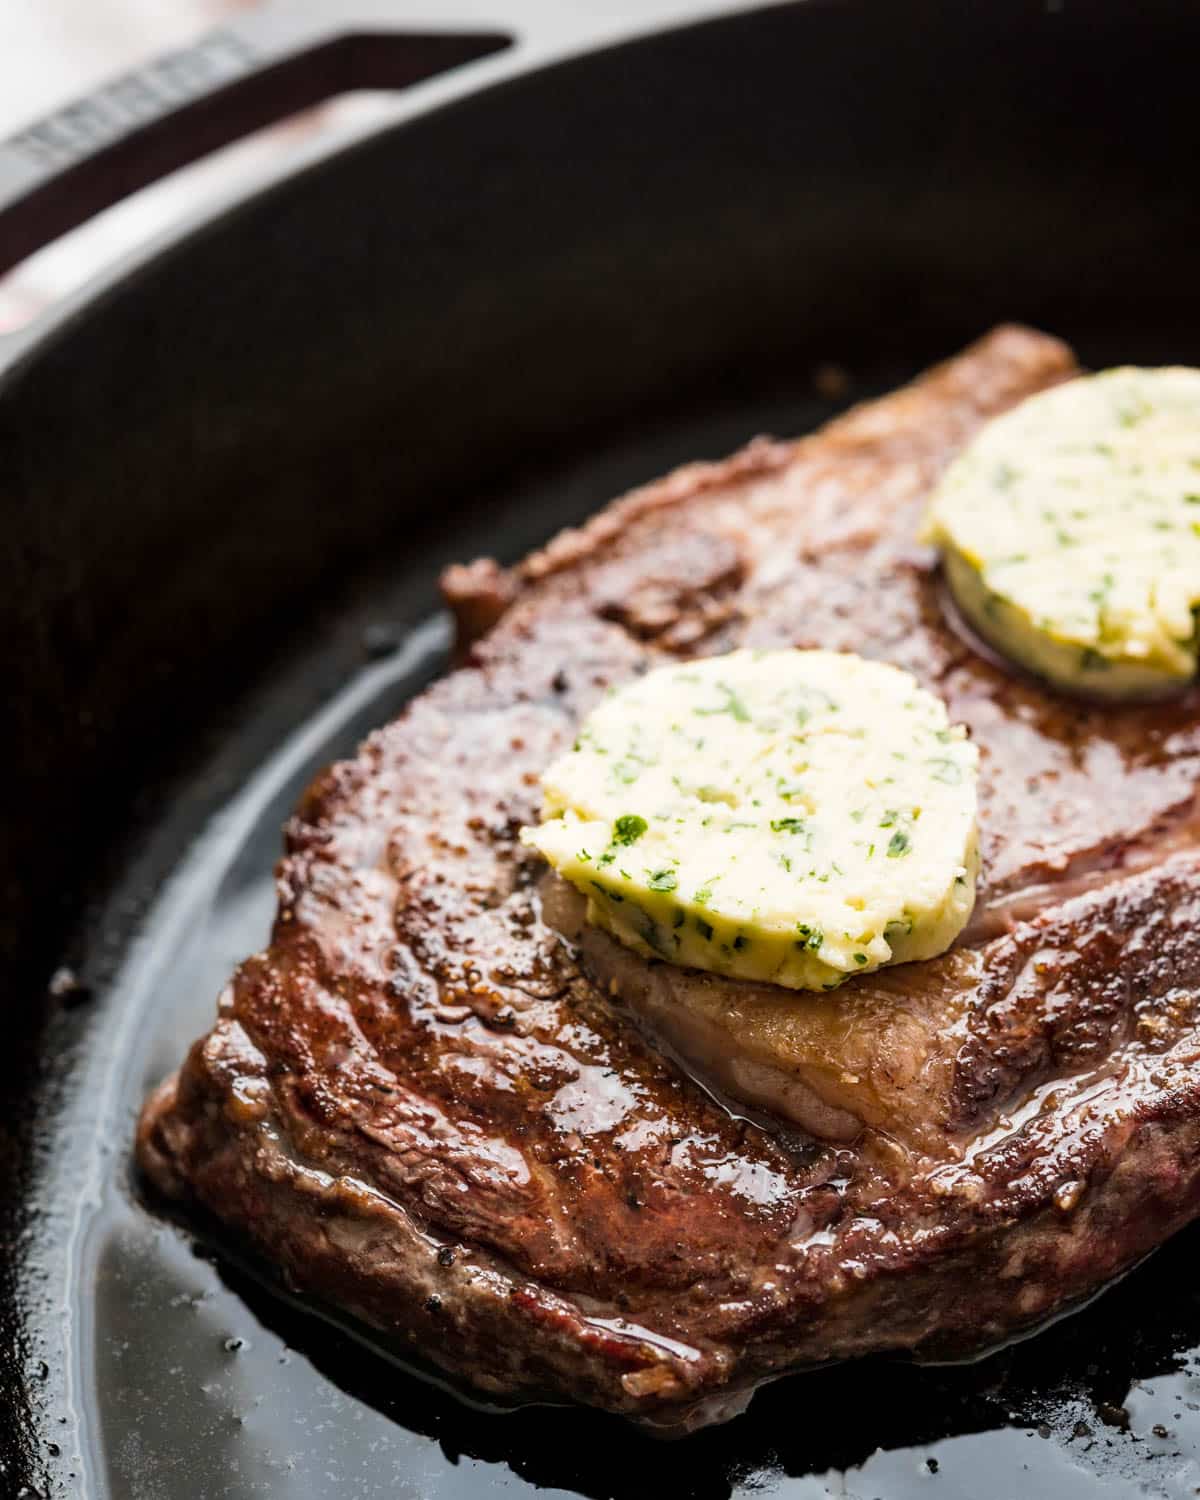 Add pats of the compound butter to the steak.